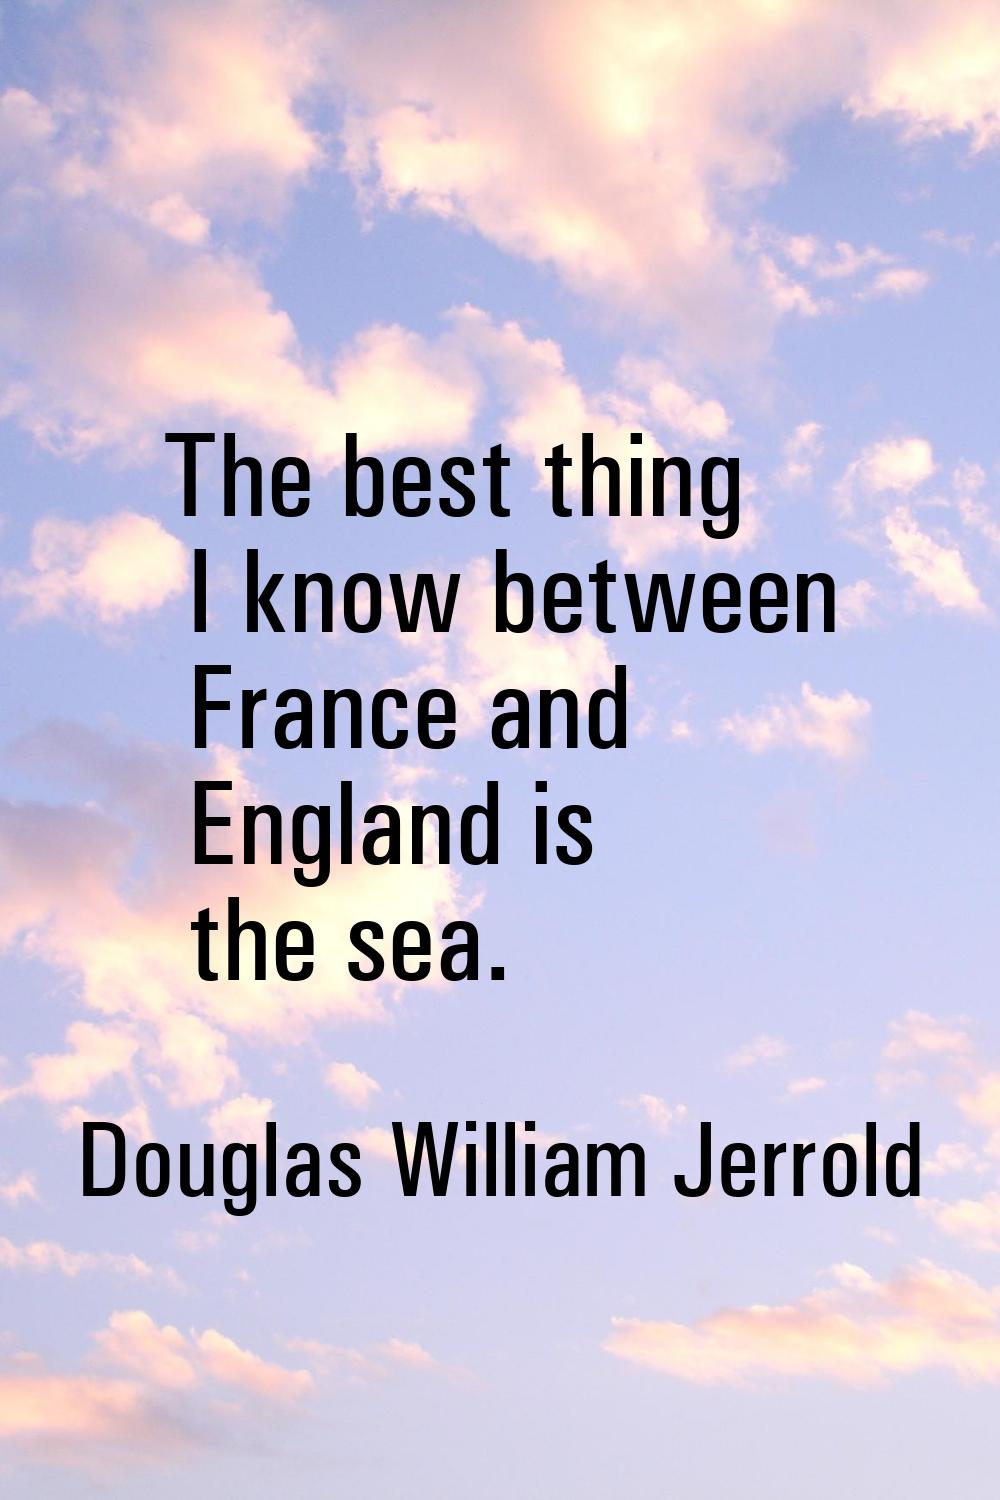 The best thing I know between France and England is the sea.